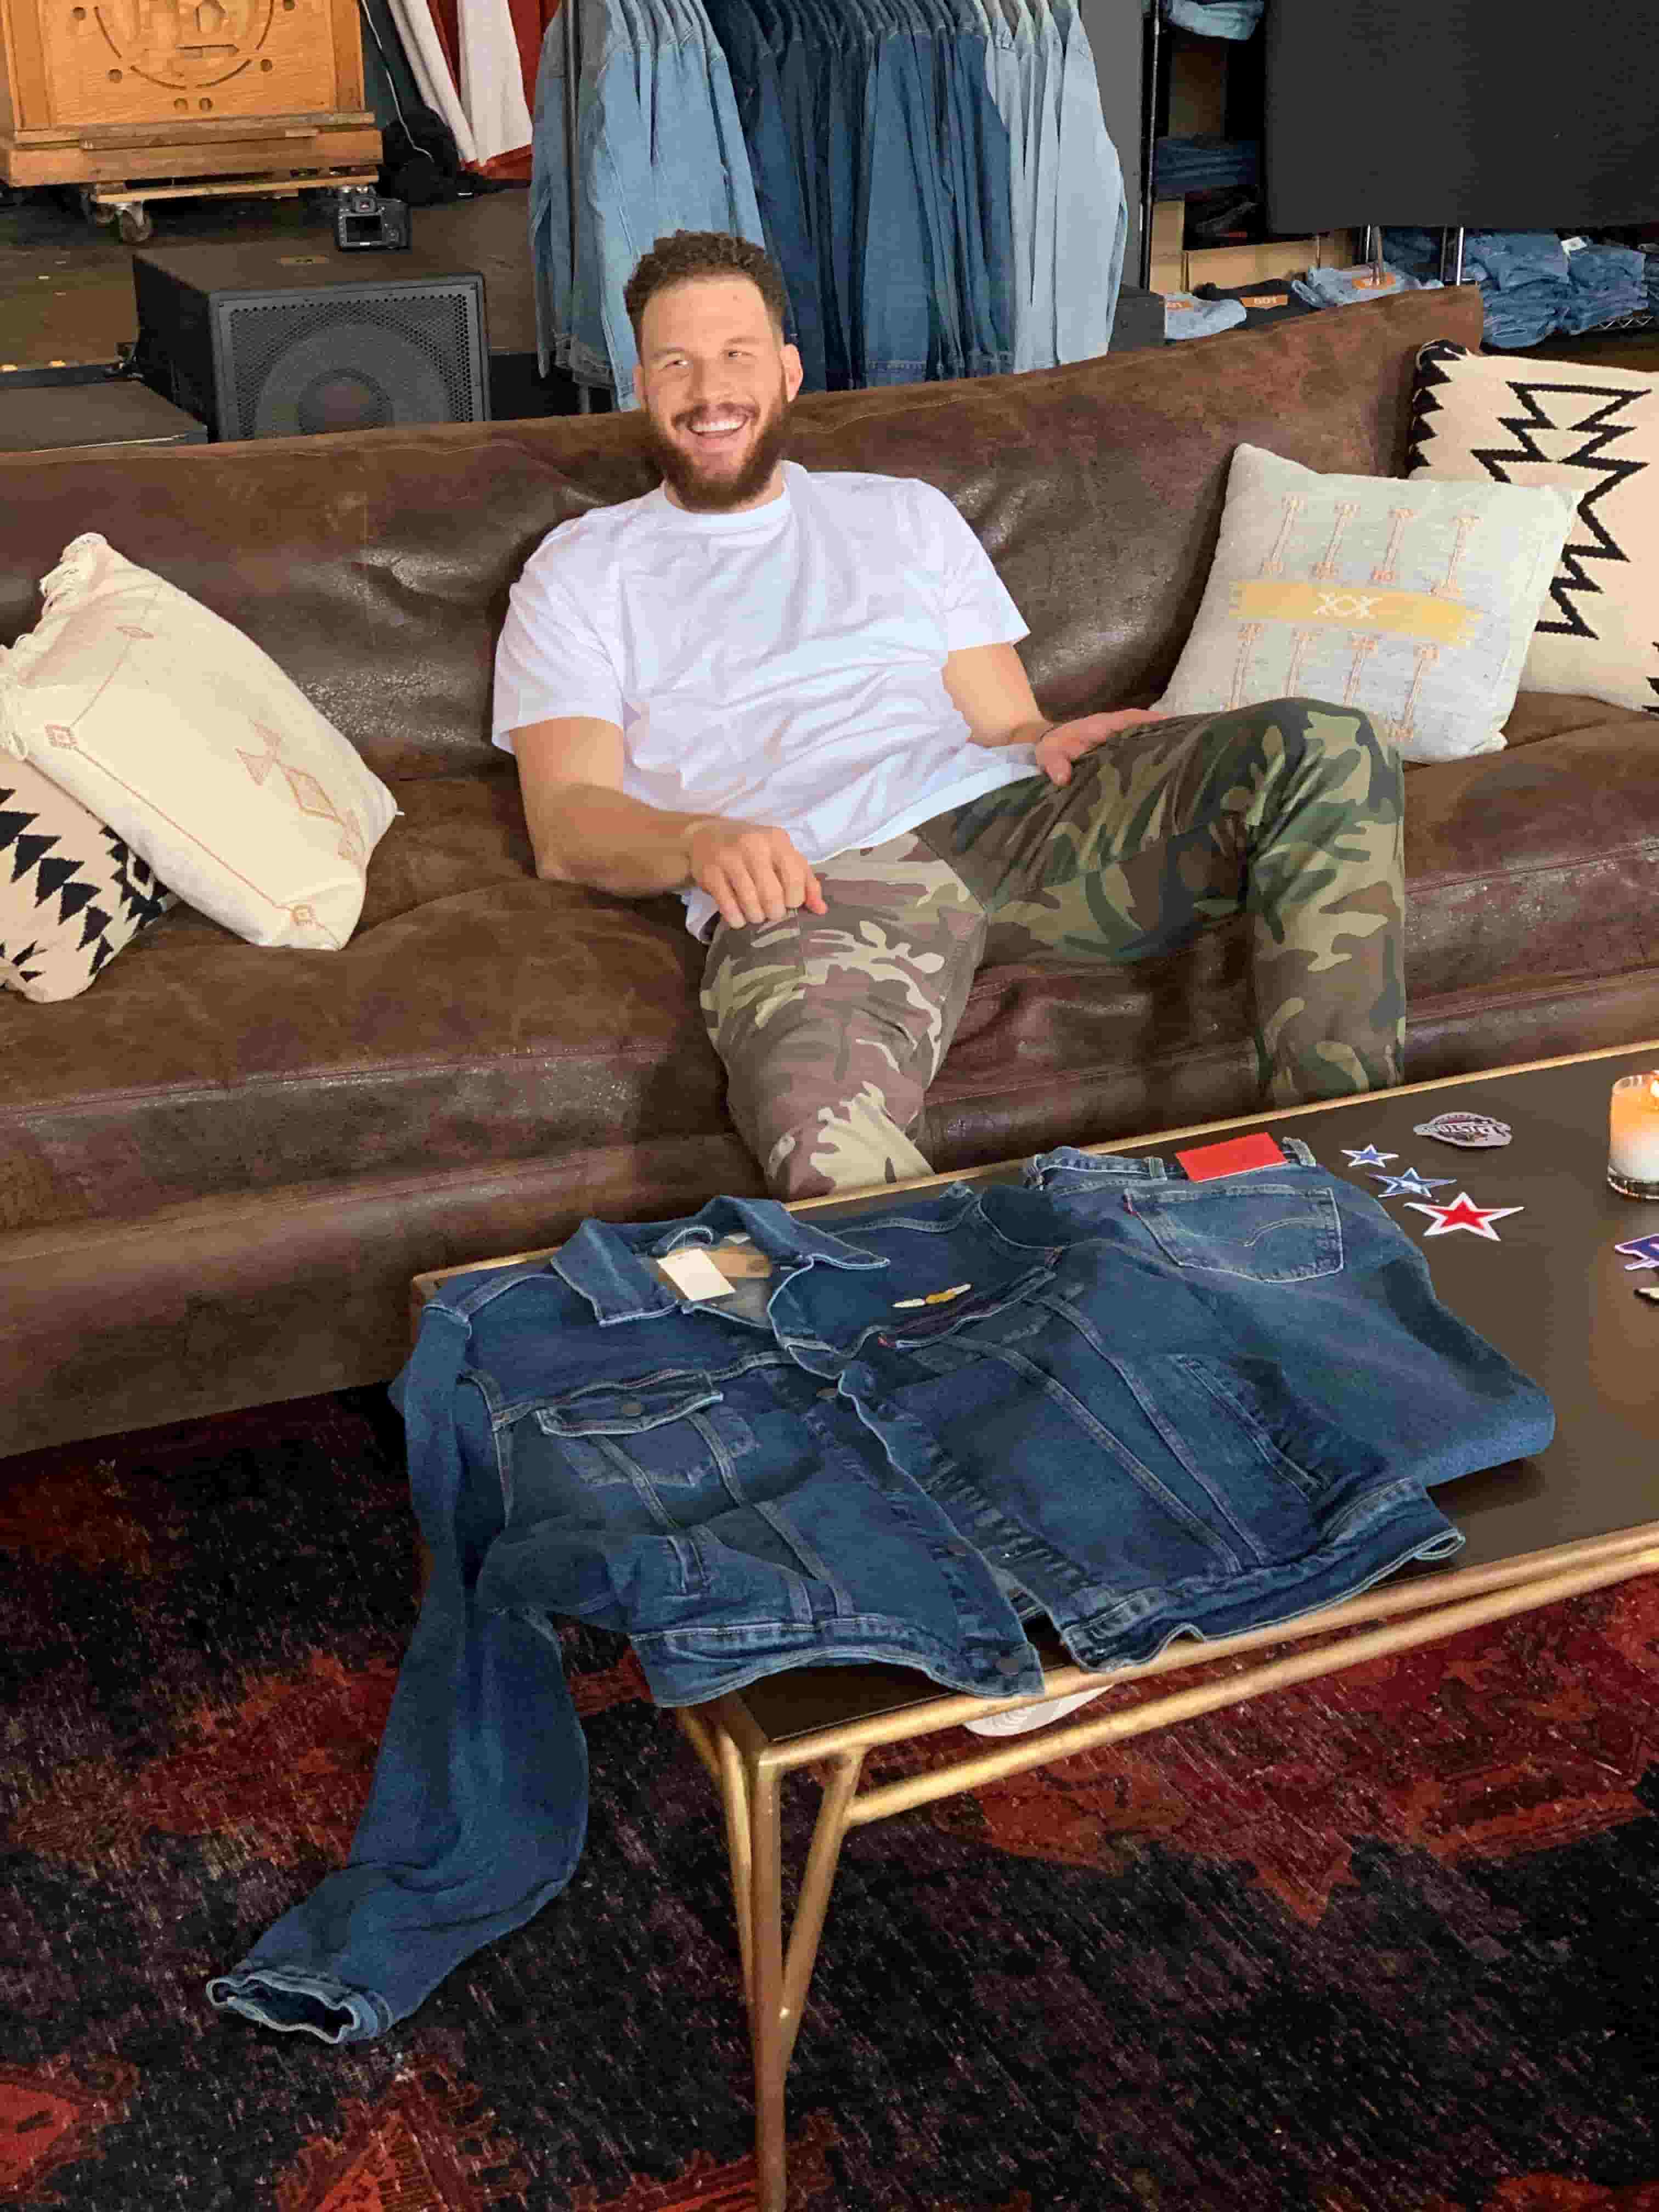 Blake Griffin posing on couch with Levi's